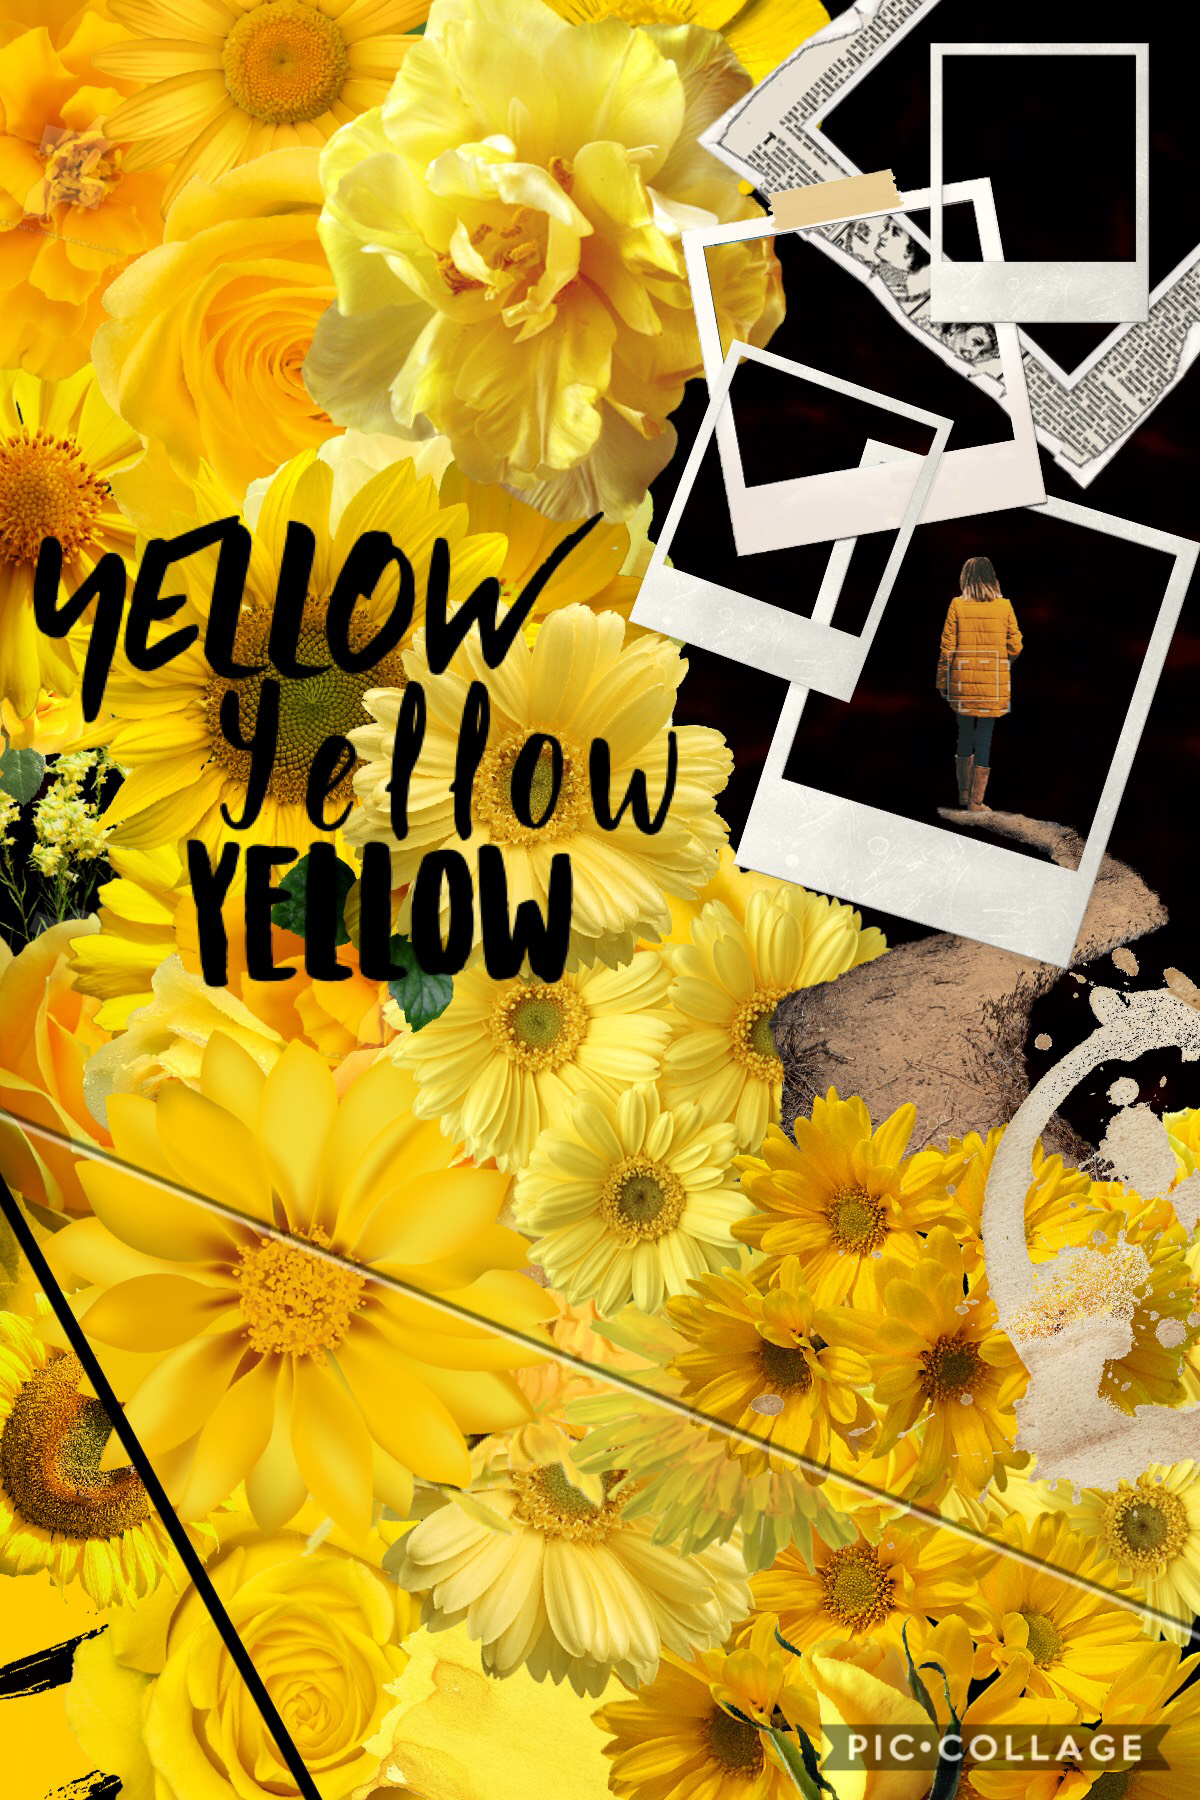 🌼Yellow🌼 
Comment below your favorite color! Lmk if you want to collab!!